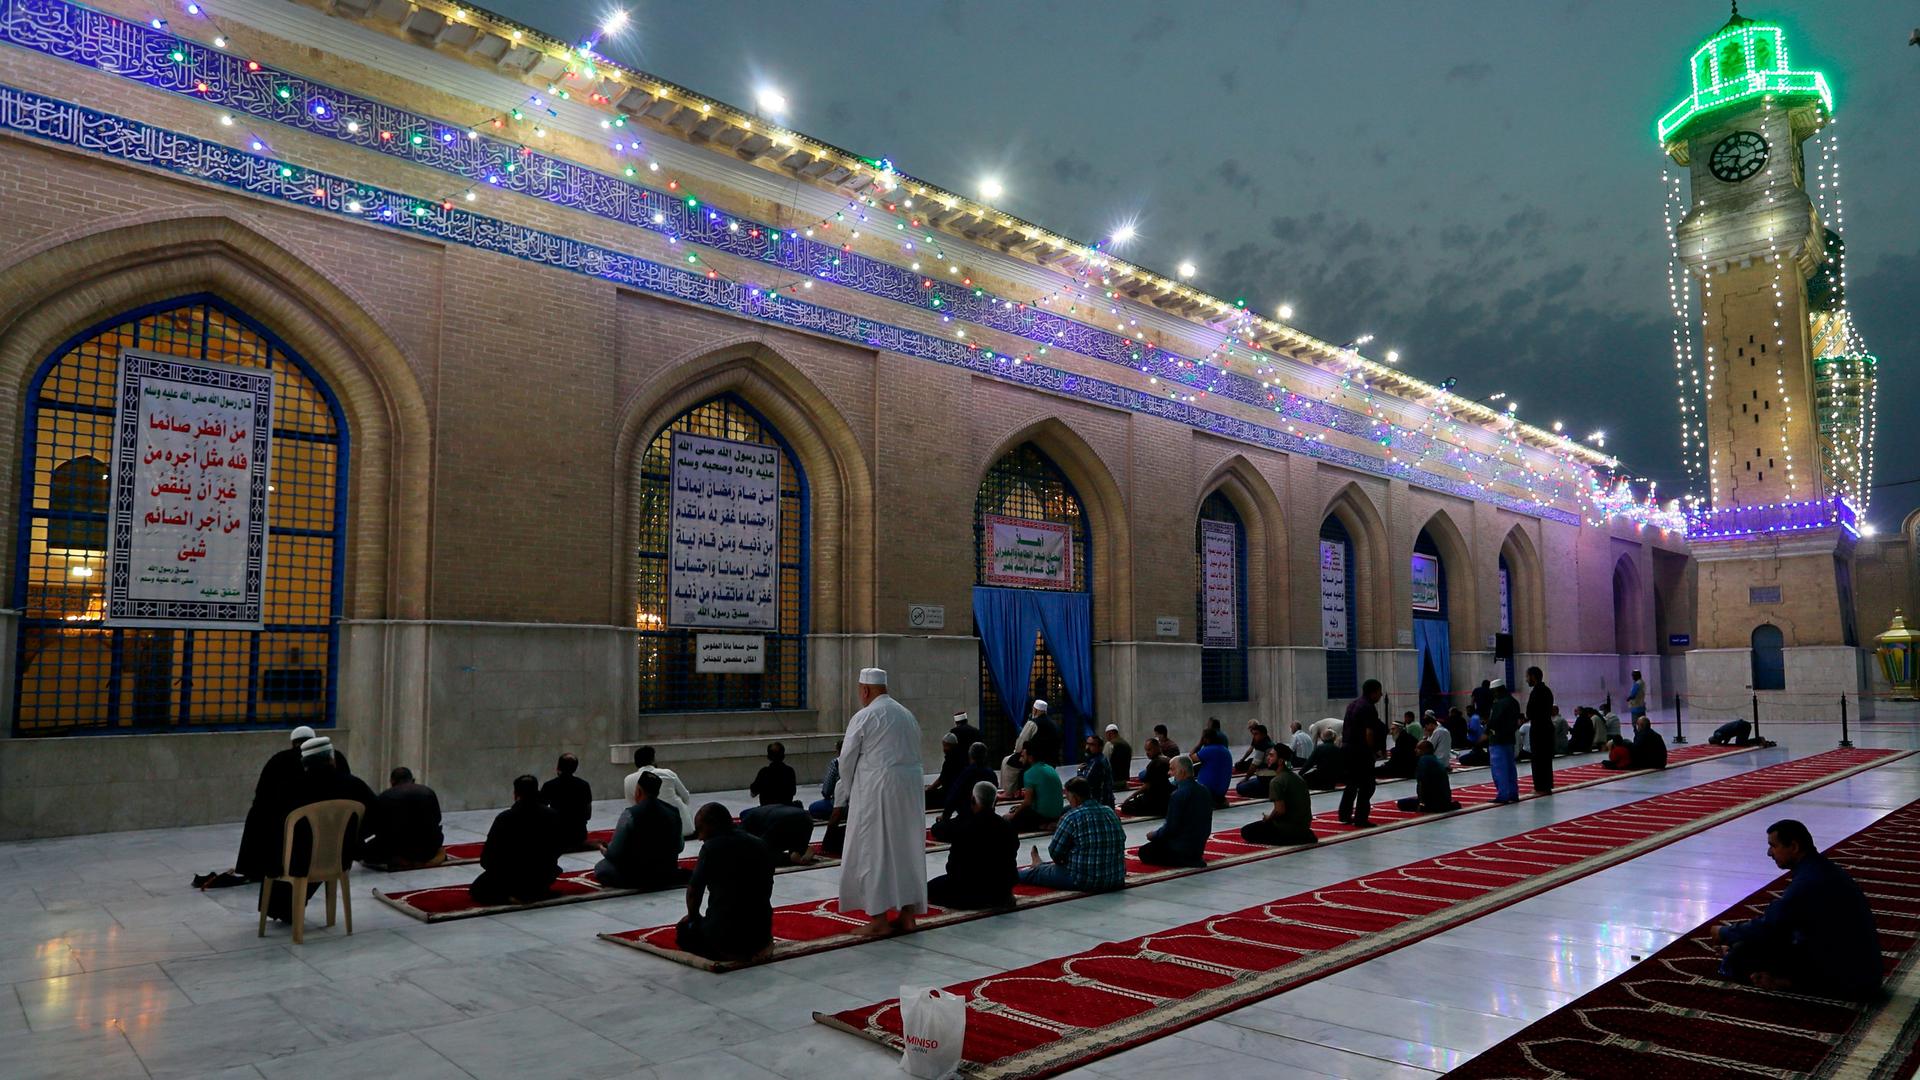 Several rows of people are shown kneeling next to a building with bright lights strung across the top.